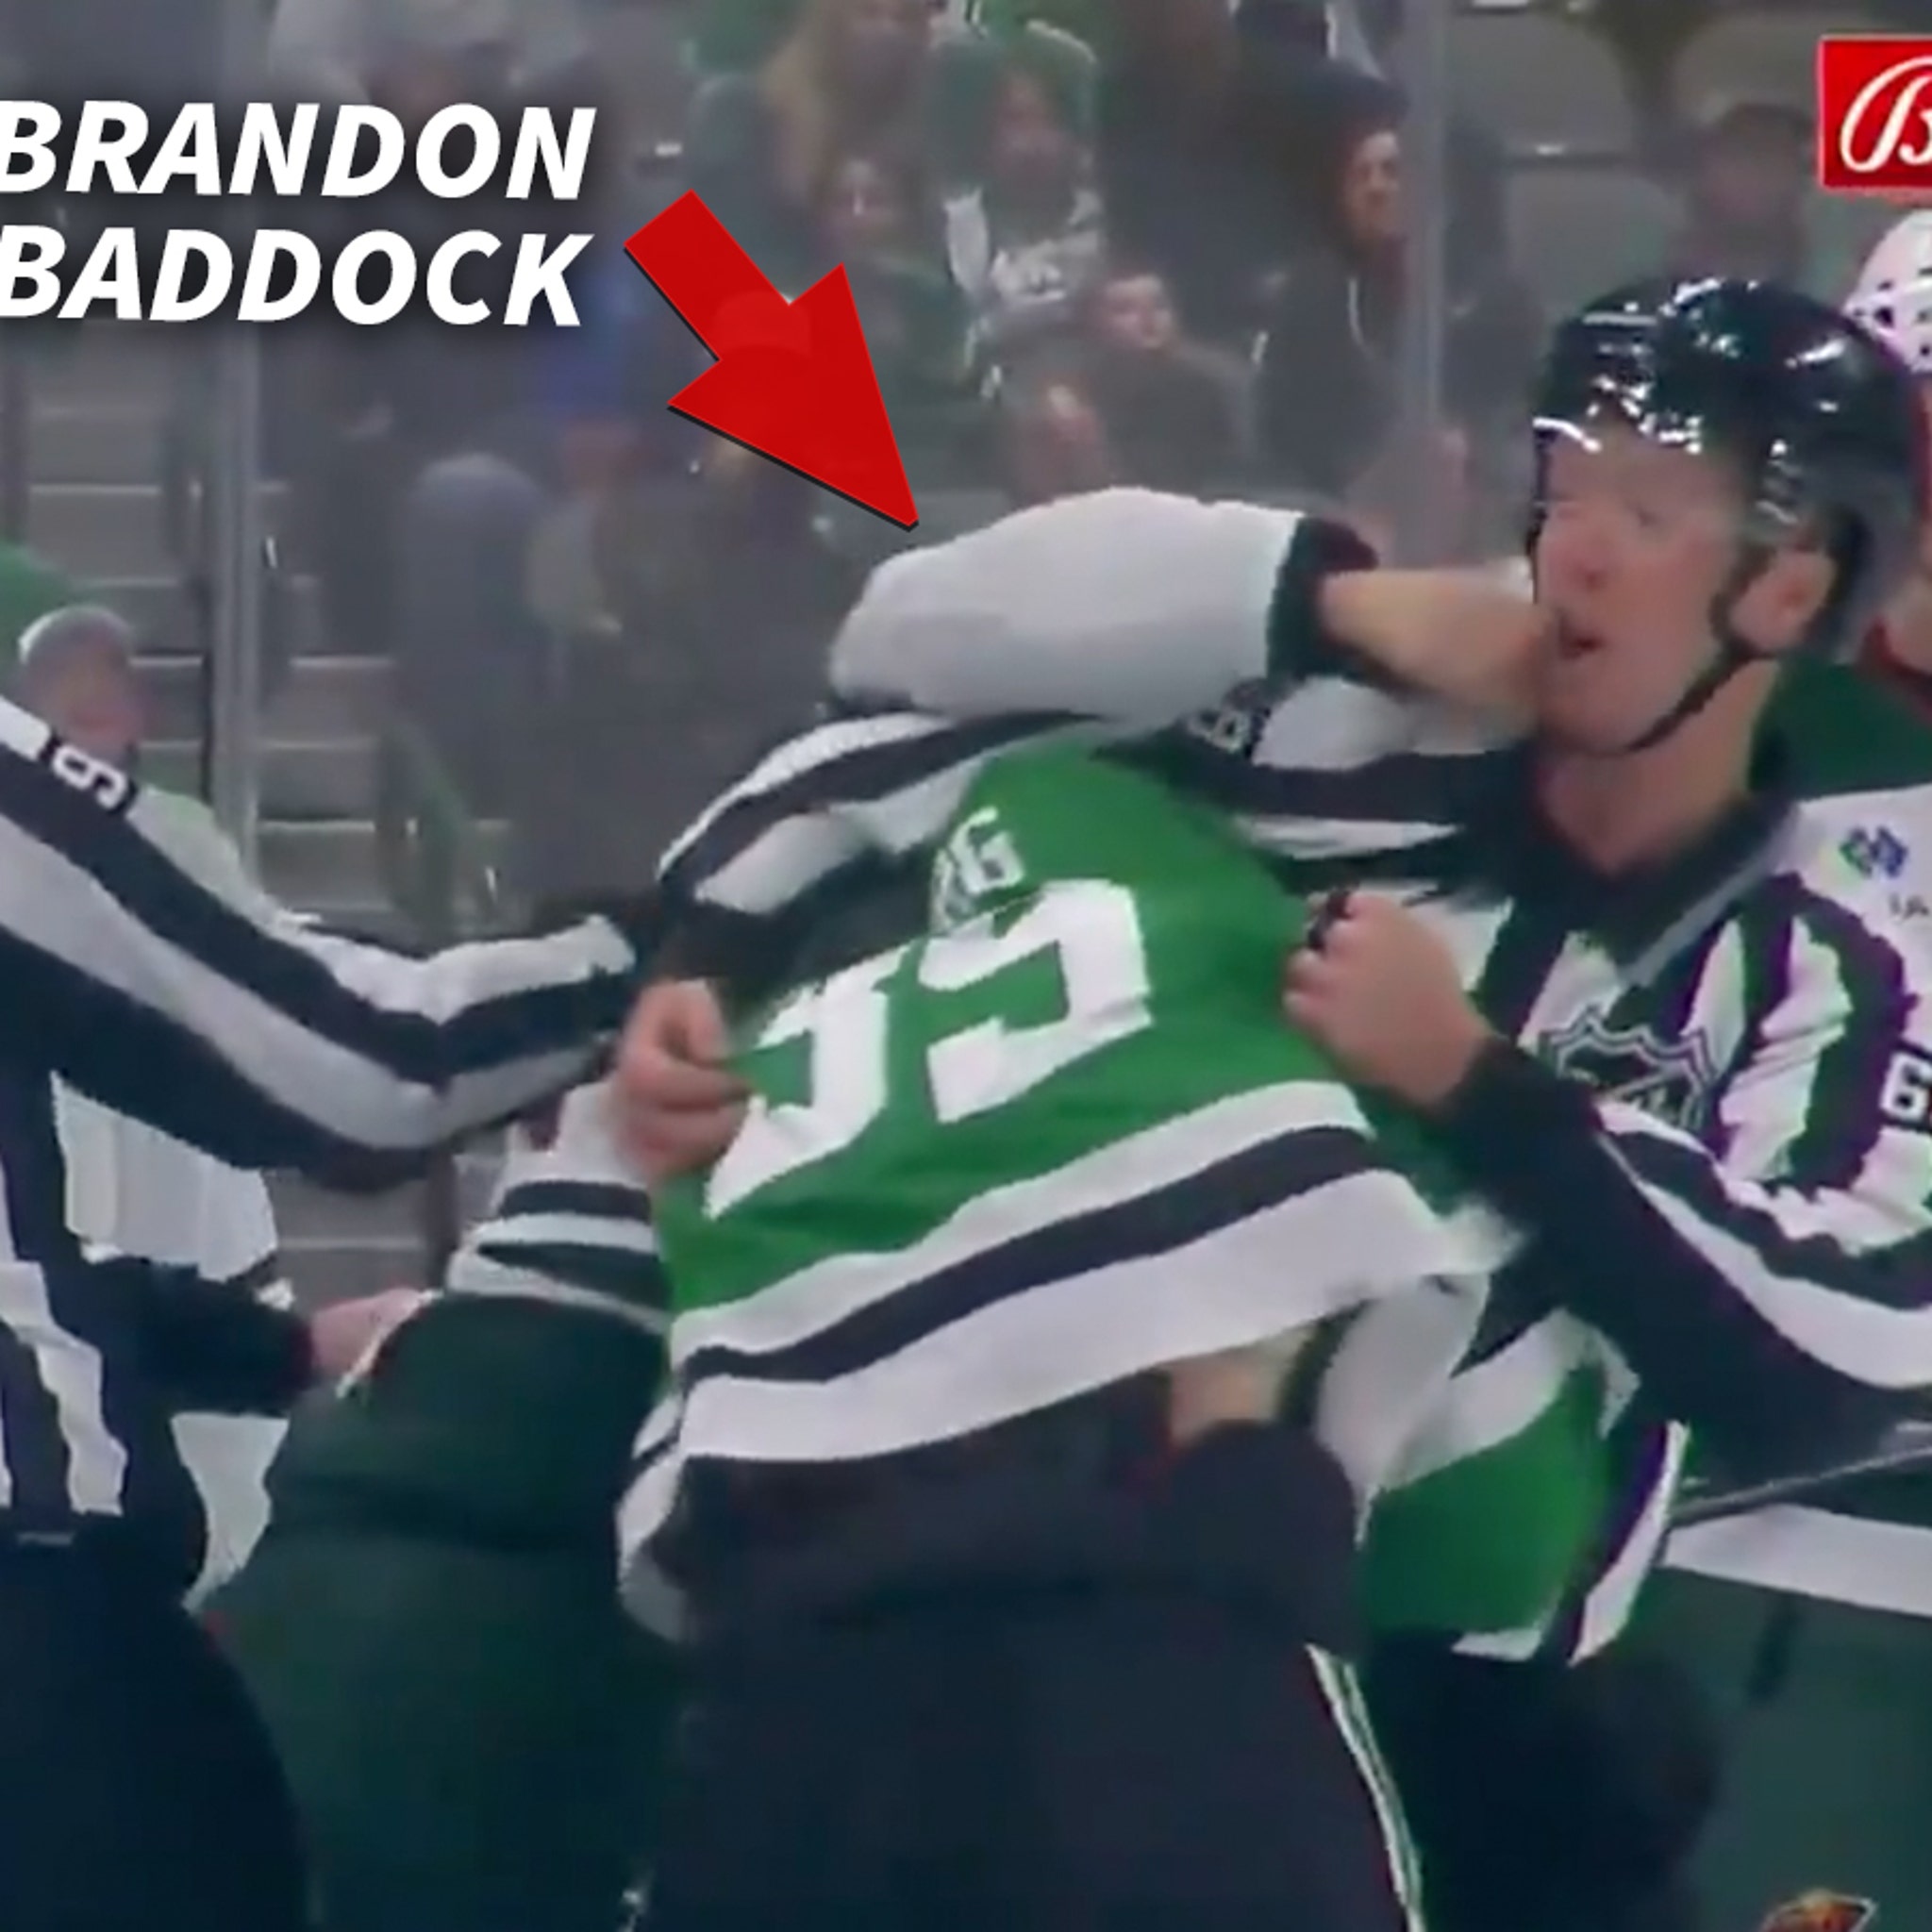 Beer league goalie confuses players with his referee-themed jersey -  Article - Bardown